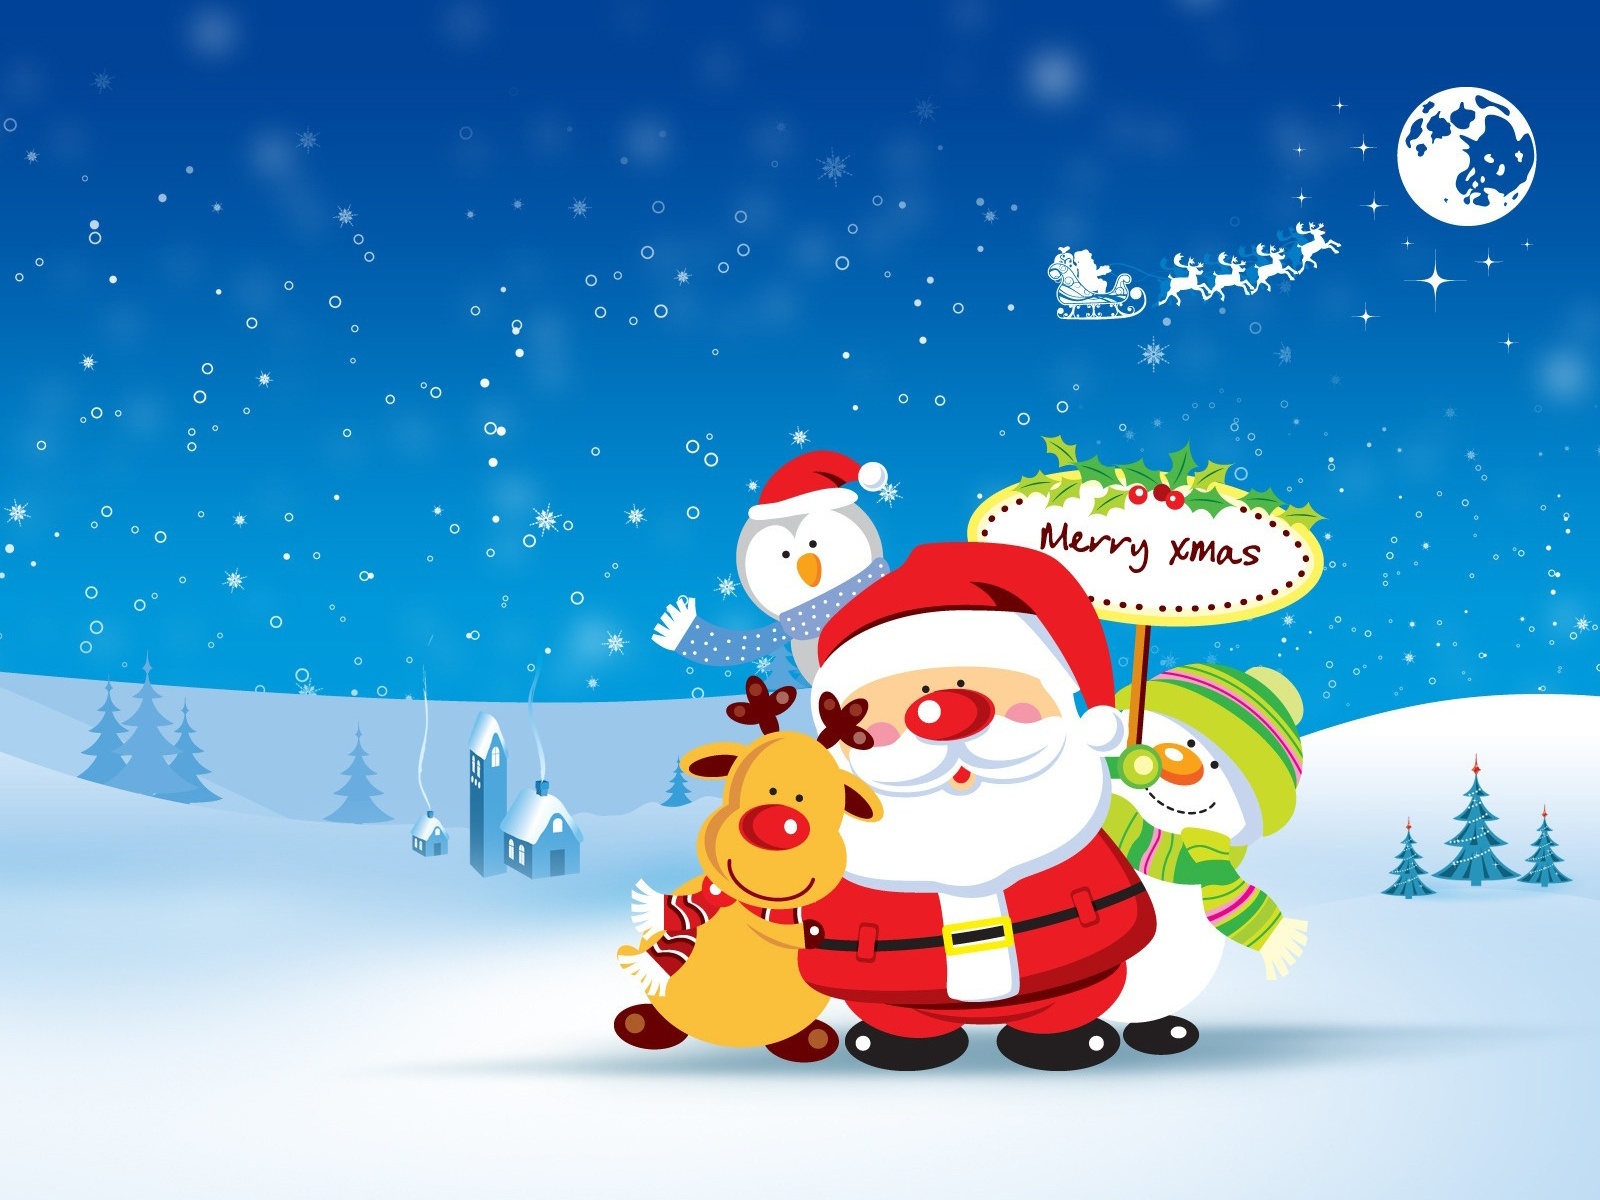 Free download Cute Merry Christmas Wallpaper HD Wallpaper [1600x1200] for your Desktop, Mobile & Tablet. Explore Cute Christmas Wallpaper Free. Free 3D Christmas Wallpaper, Free Animated Christmas Wallpaper, Christmas